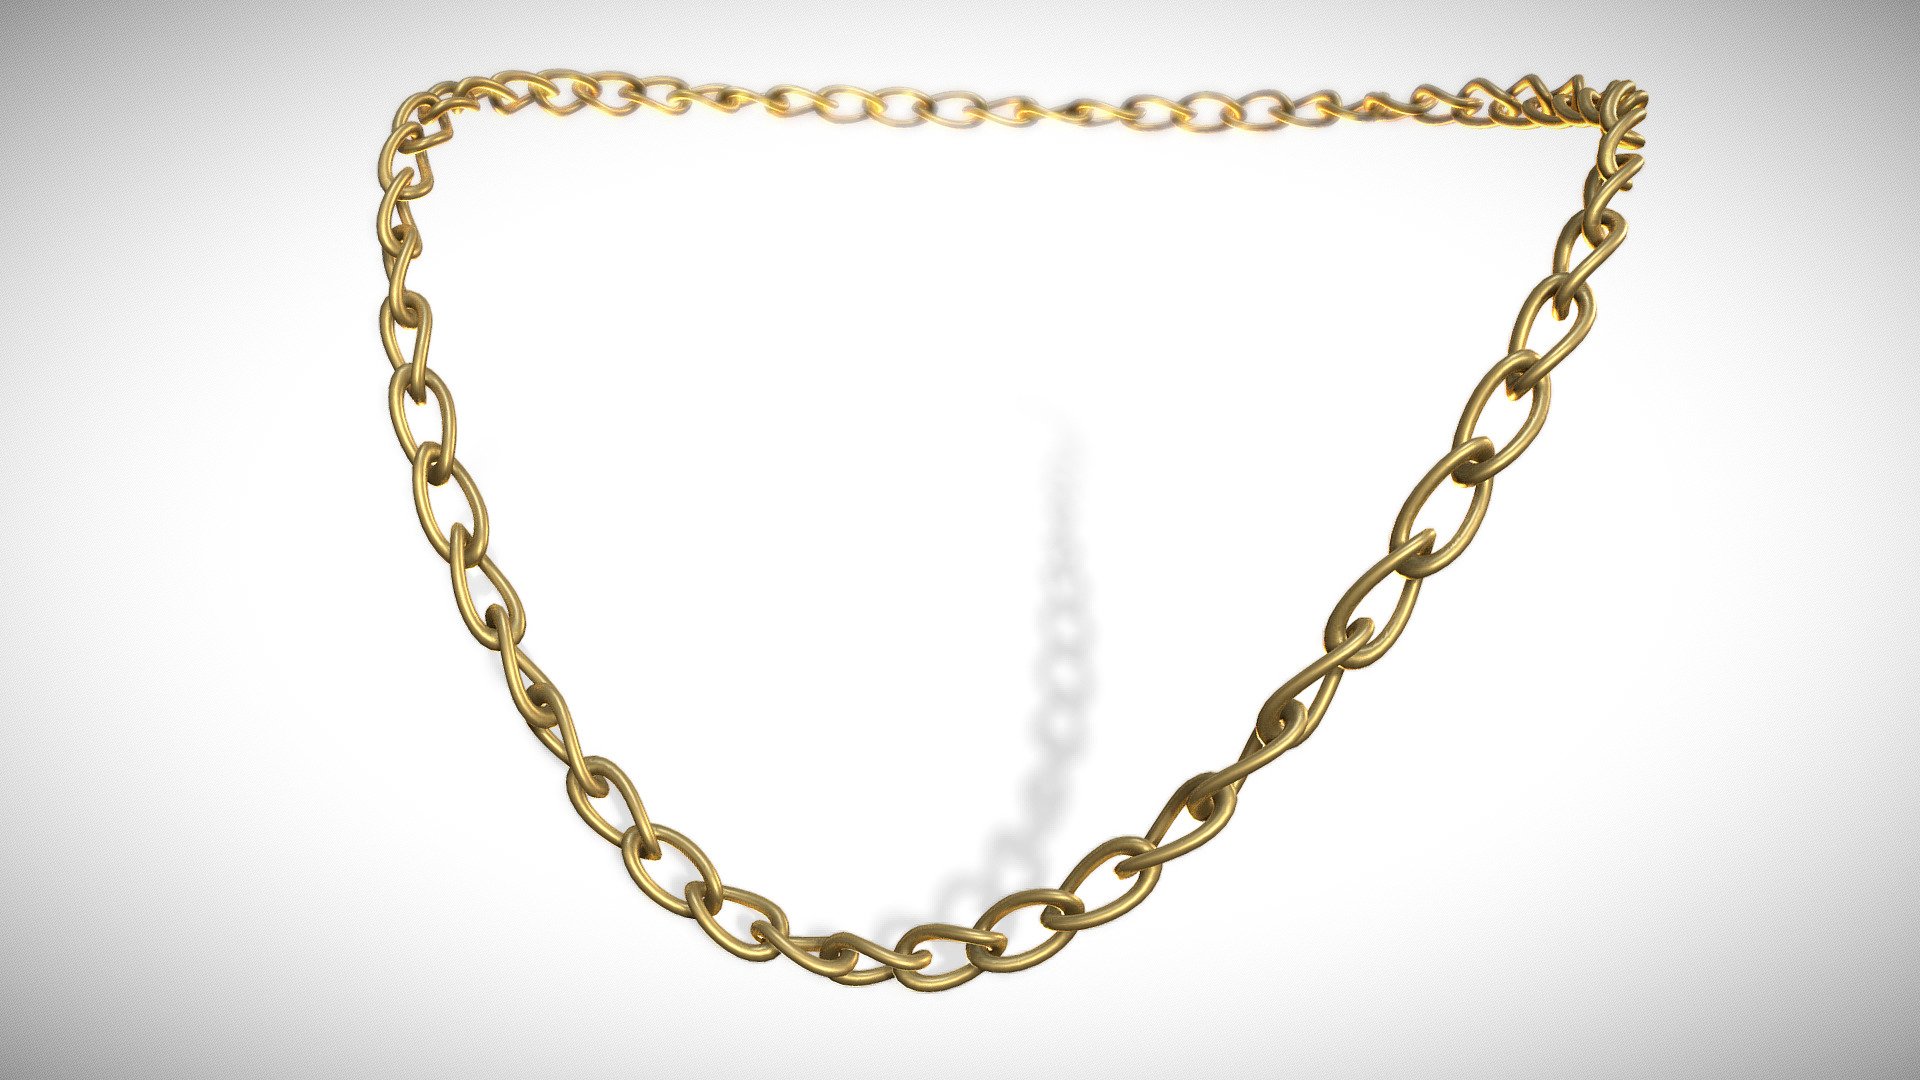 Digital painting in 3D Coat

PBR Textures ( 2048 px )

Quad Mesh

by Lucid Dreams visuals

www.luciddreamsvisuals.com.ar - Gold Neck twisted Chain - Buy Royalty Free 3D model by Lucid Dreams (@lucid_dreams_visuals) 3d model